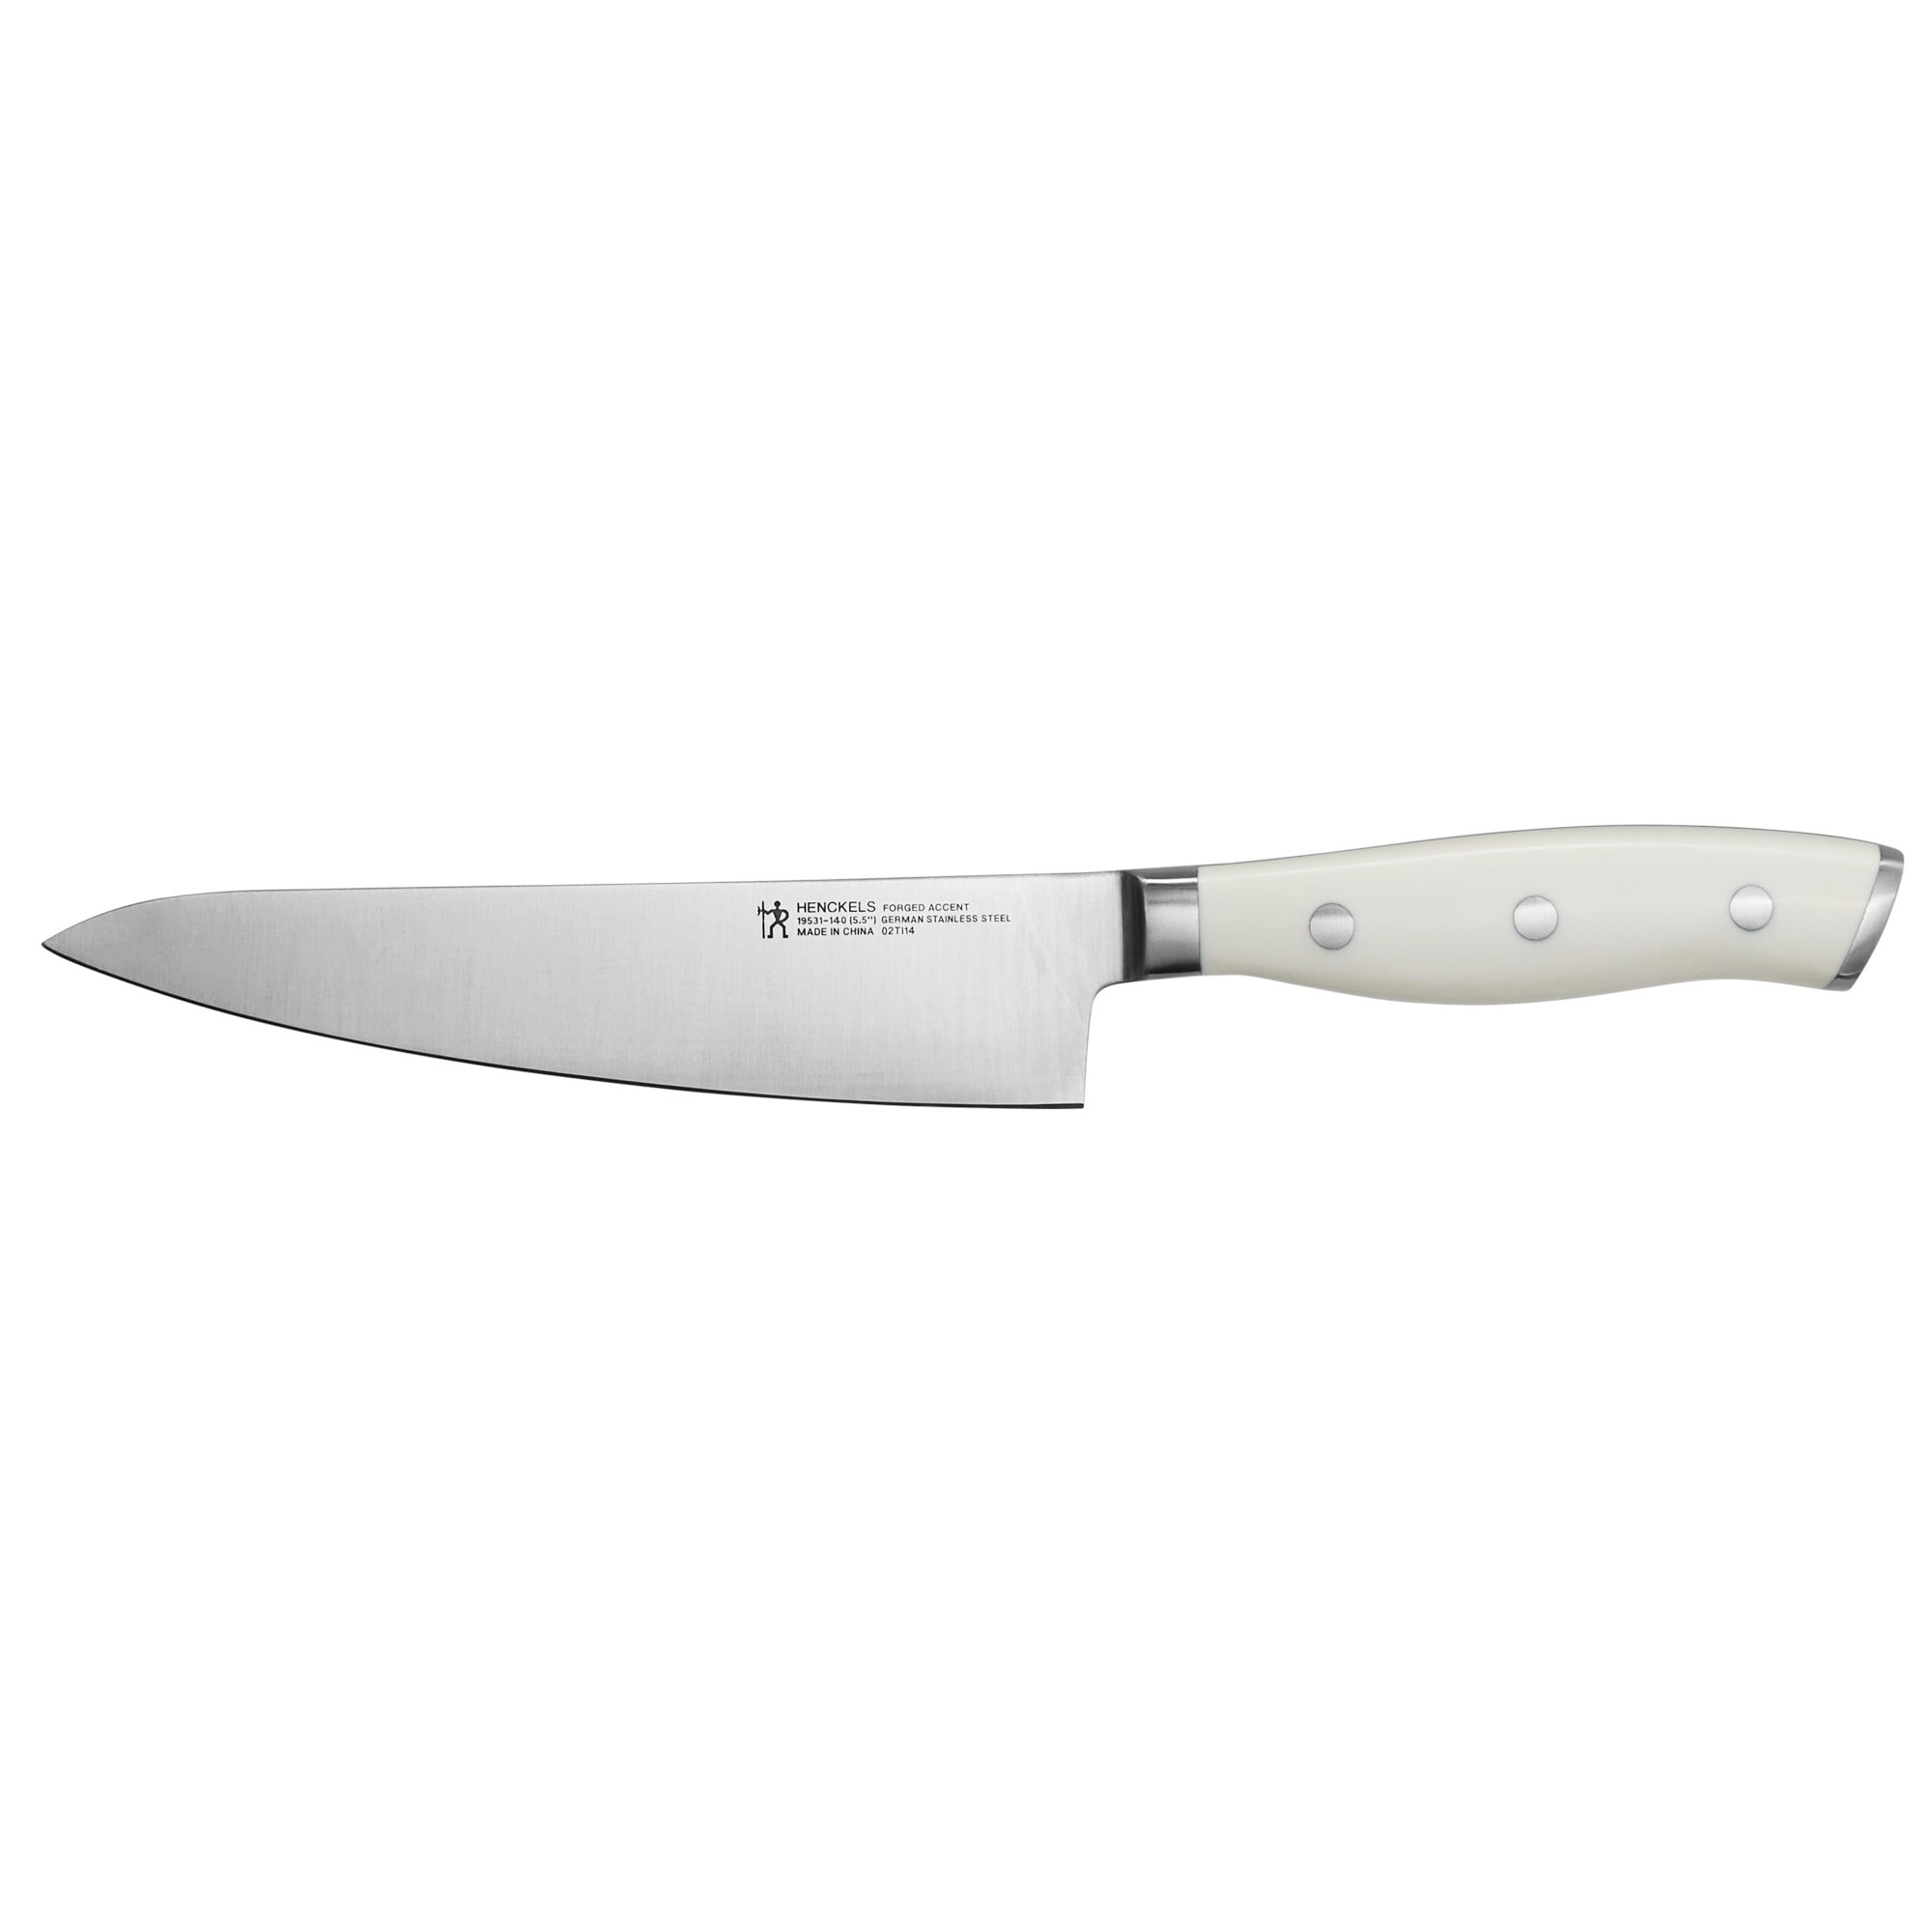 https://ak1.ostkcdn.com/images/products/is/images/direct/7daad269887ba833e89cb1cccb77b76a7bdbc3f3/Henckels-Forged-Accent-5.5-inch-Prep-Knife---White-Handle.jpg